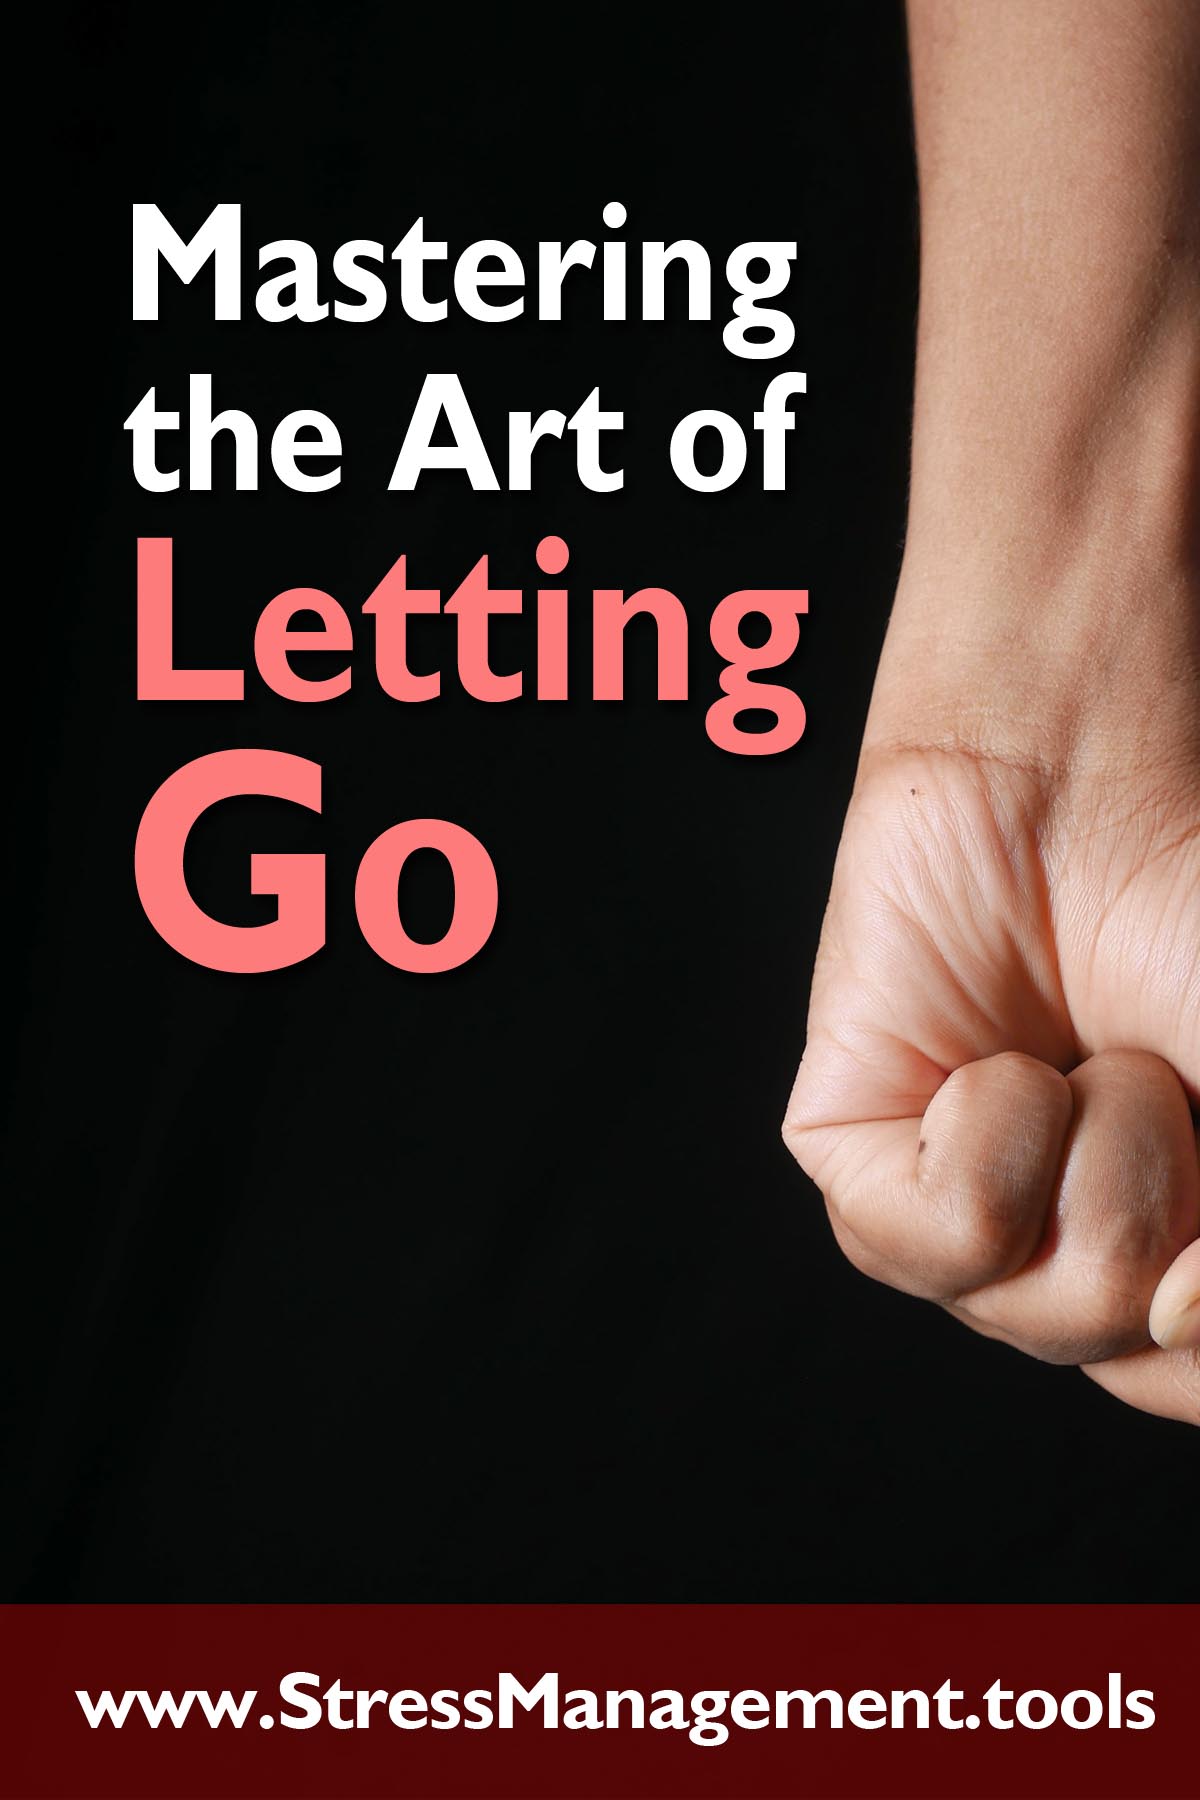 Mastering the Art of Letting Go